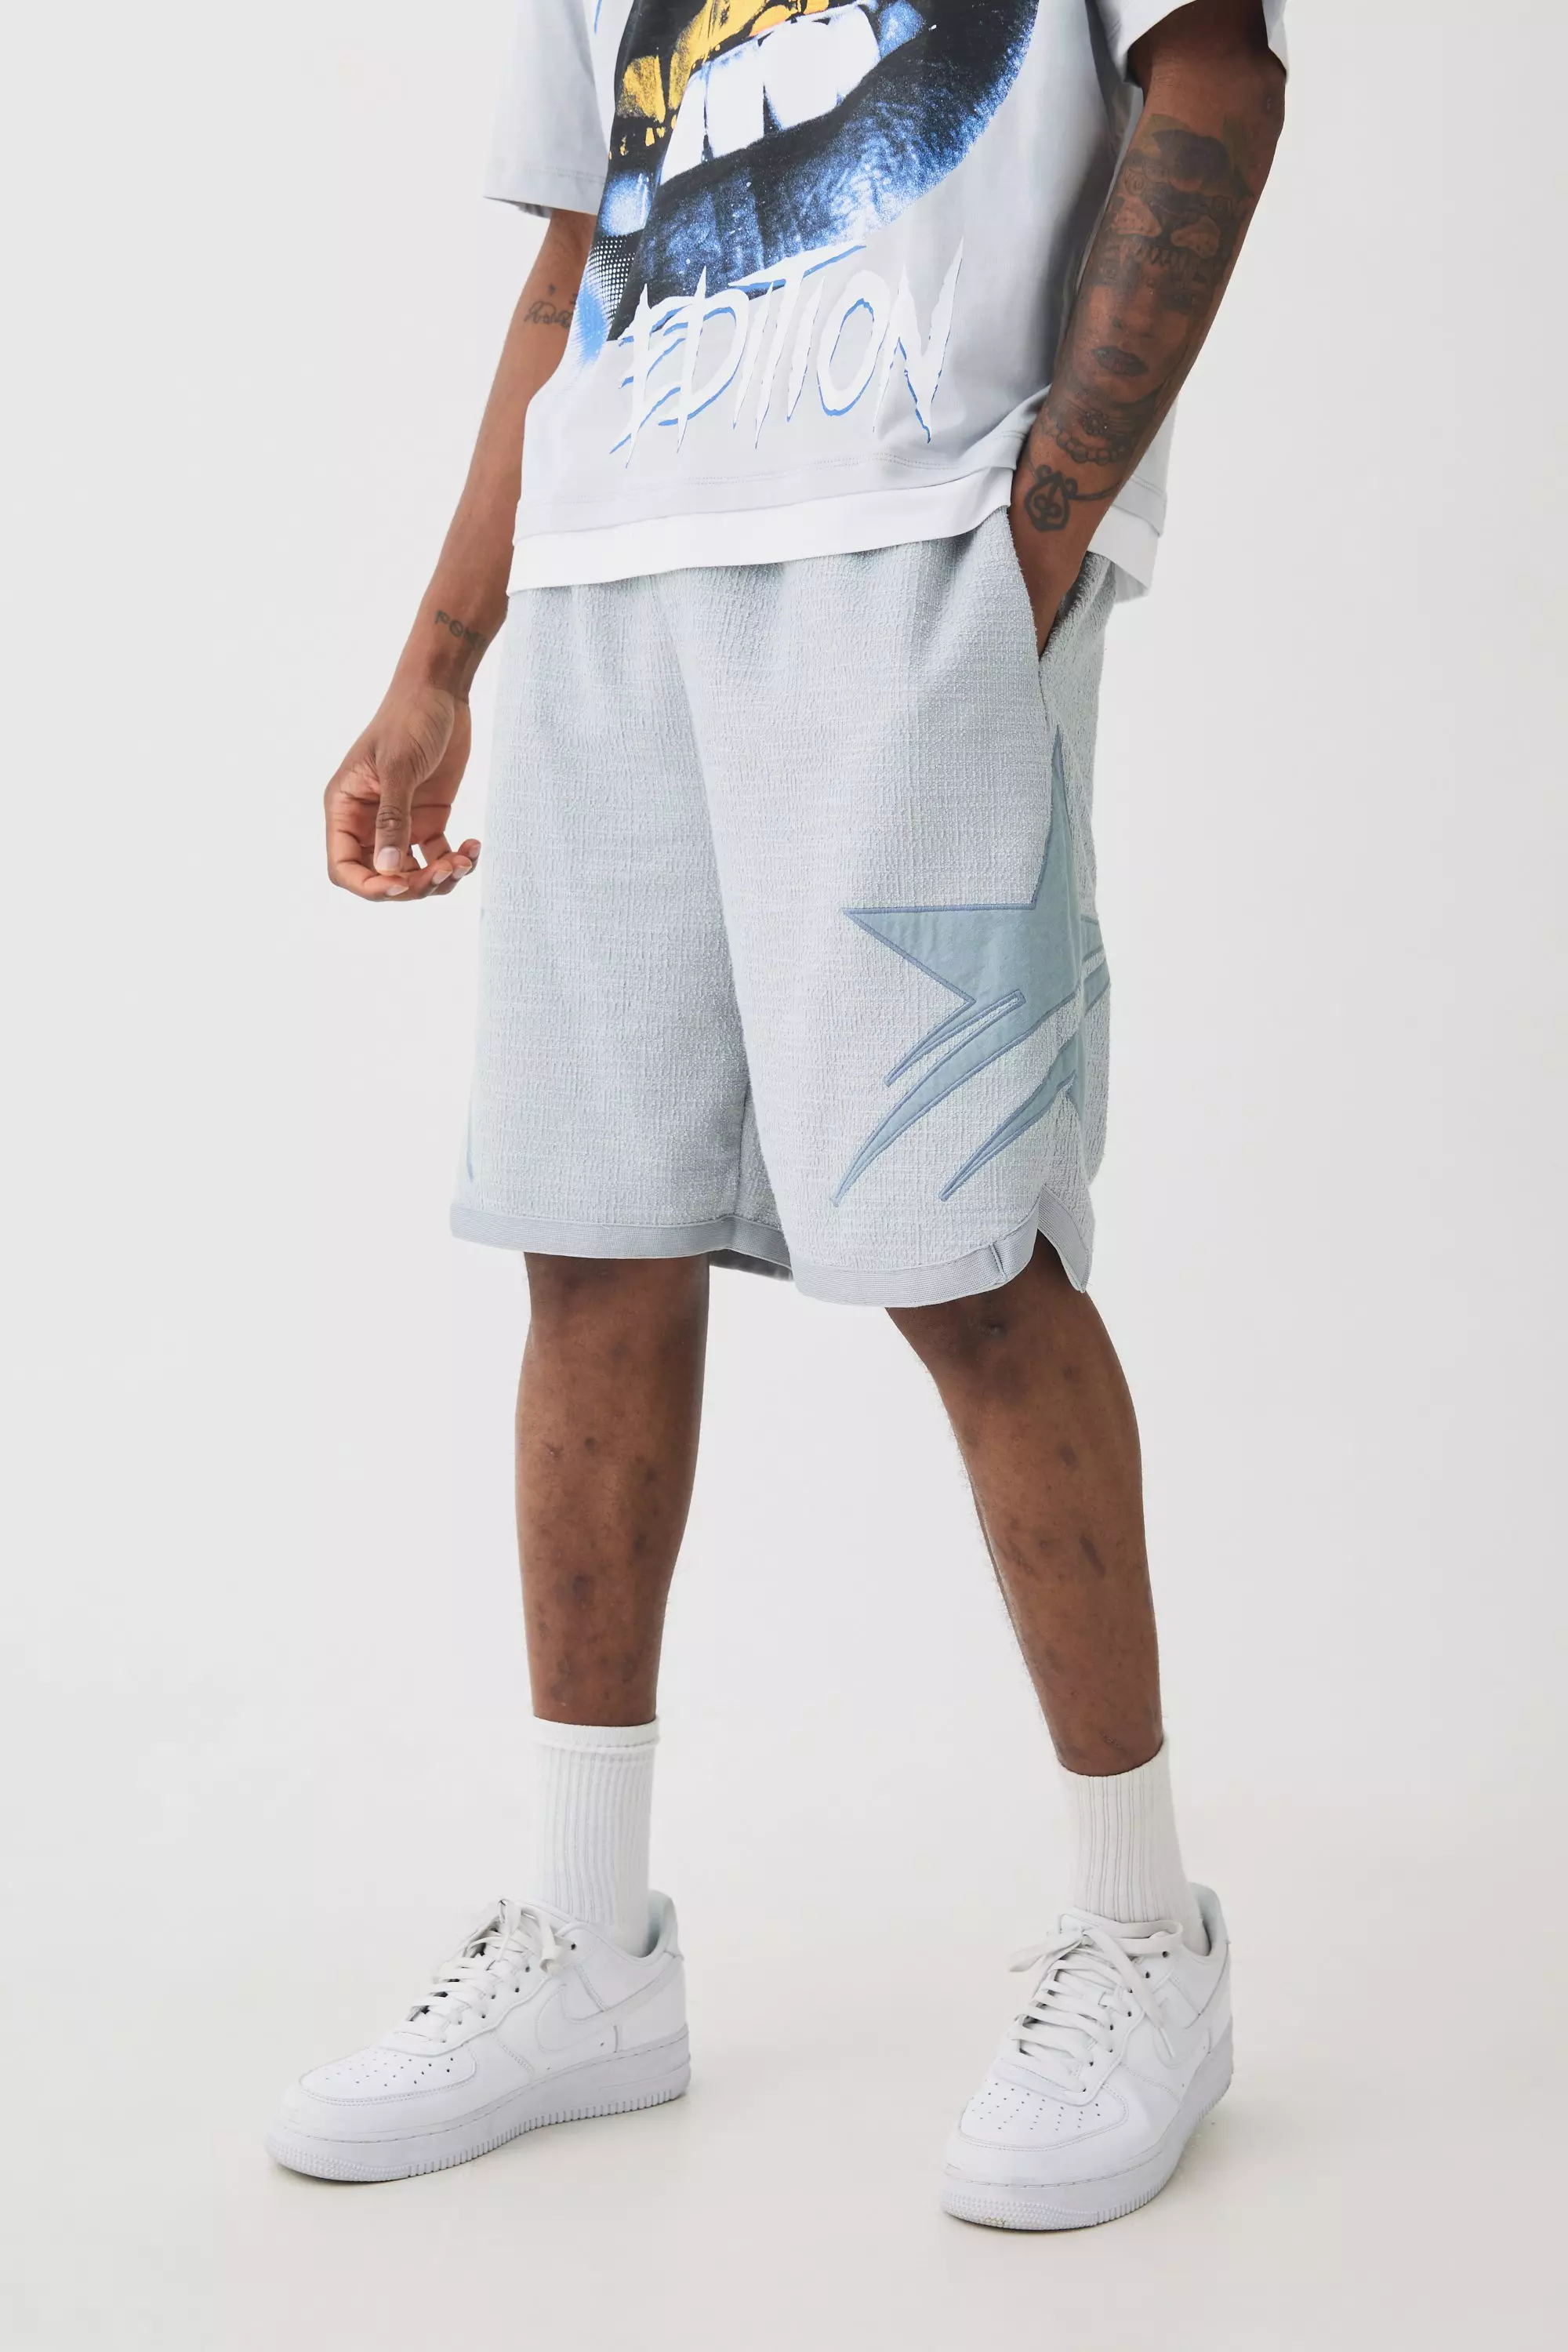 Tall Textured Star Embroidered Mid Length Basketball Short Grey